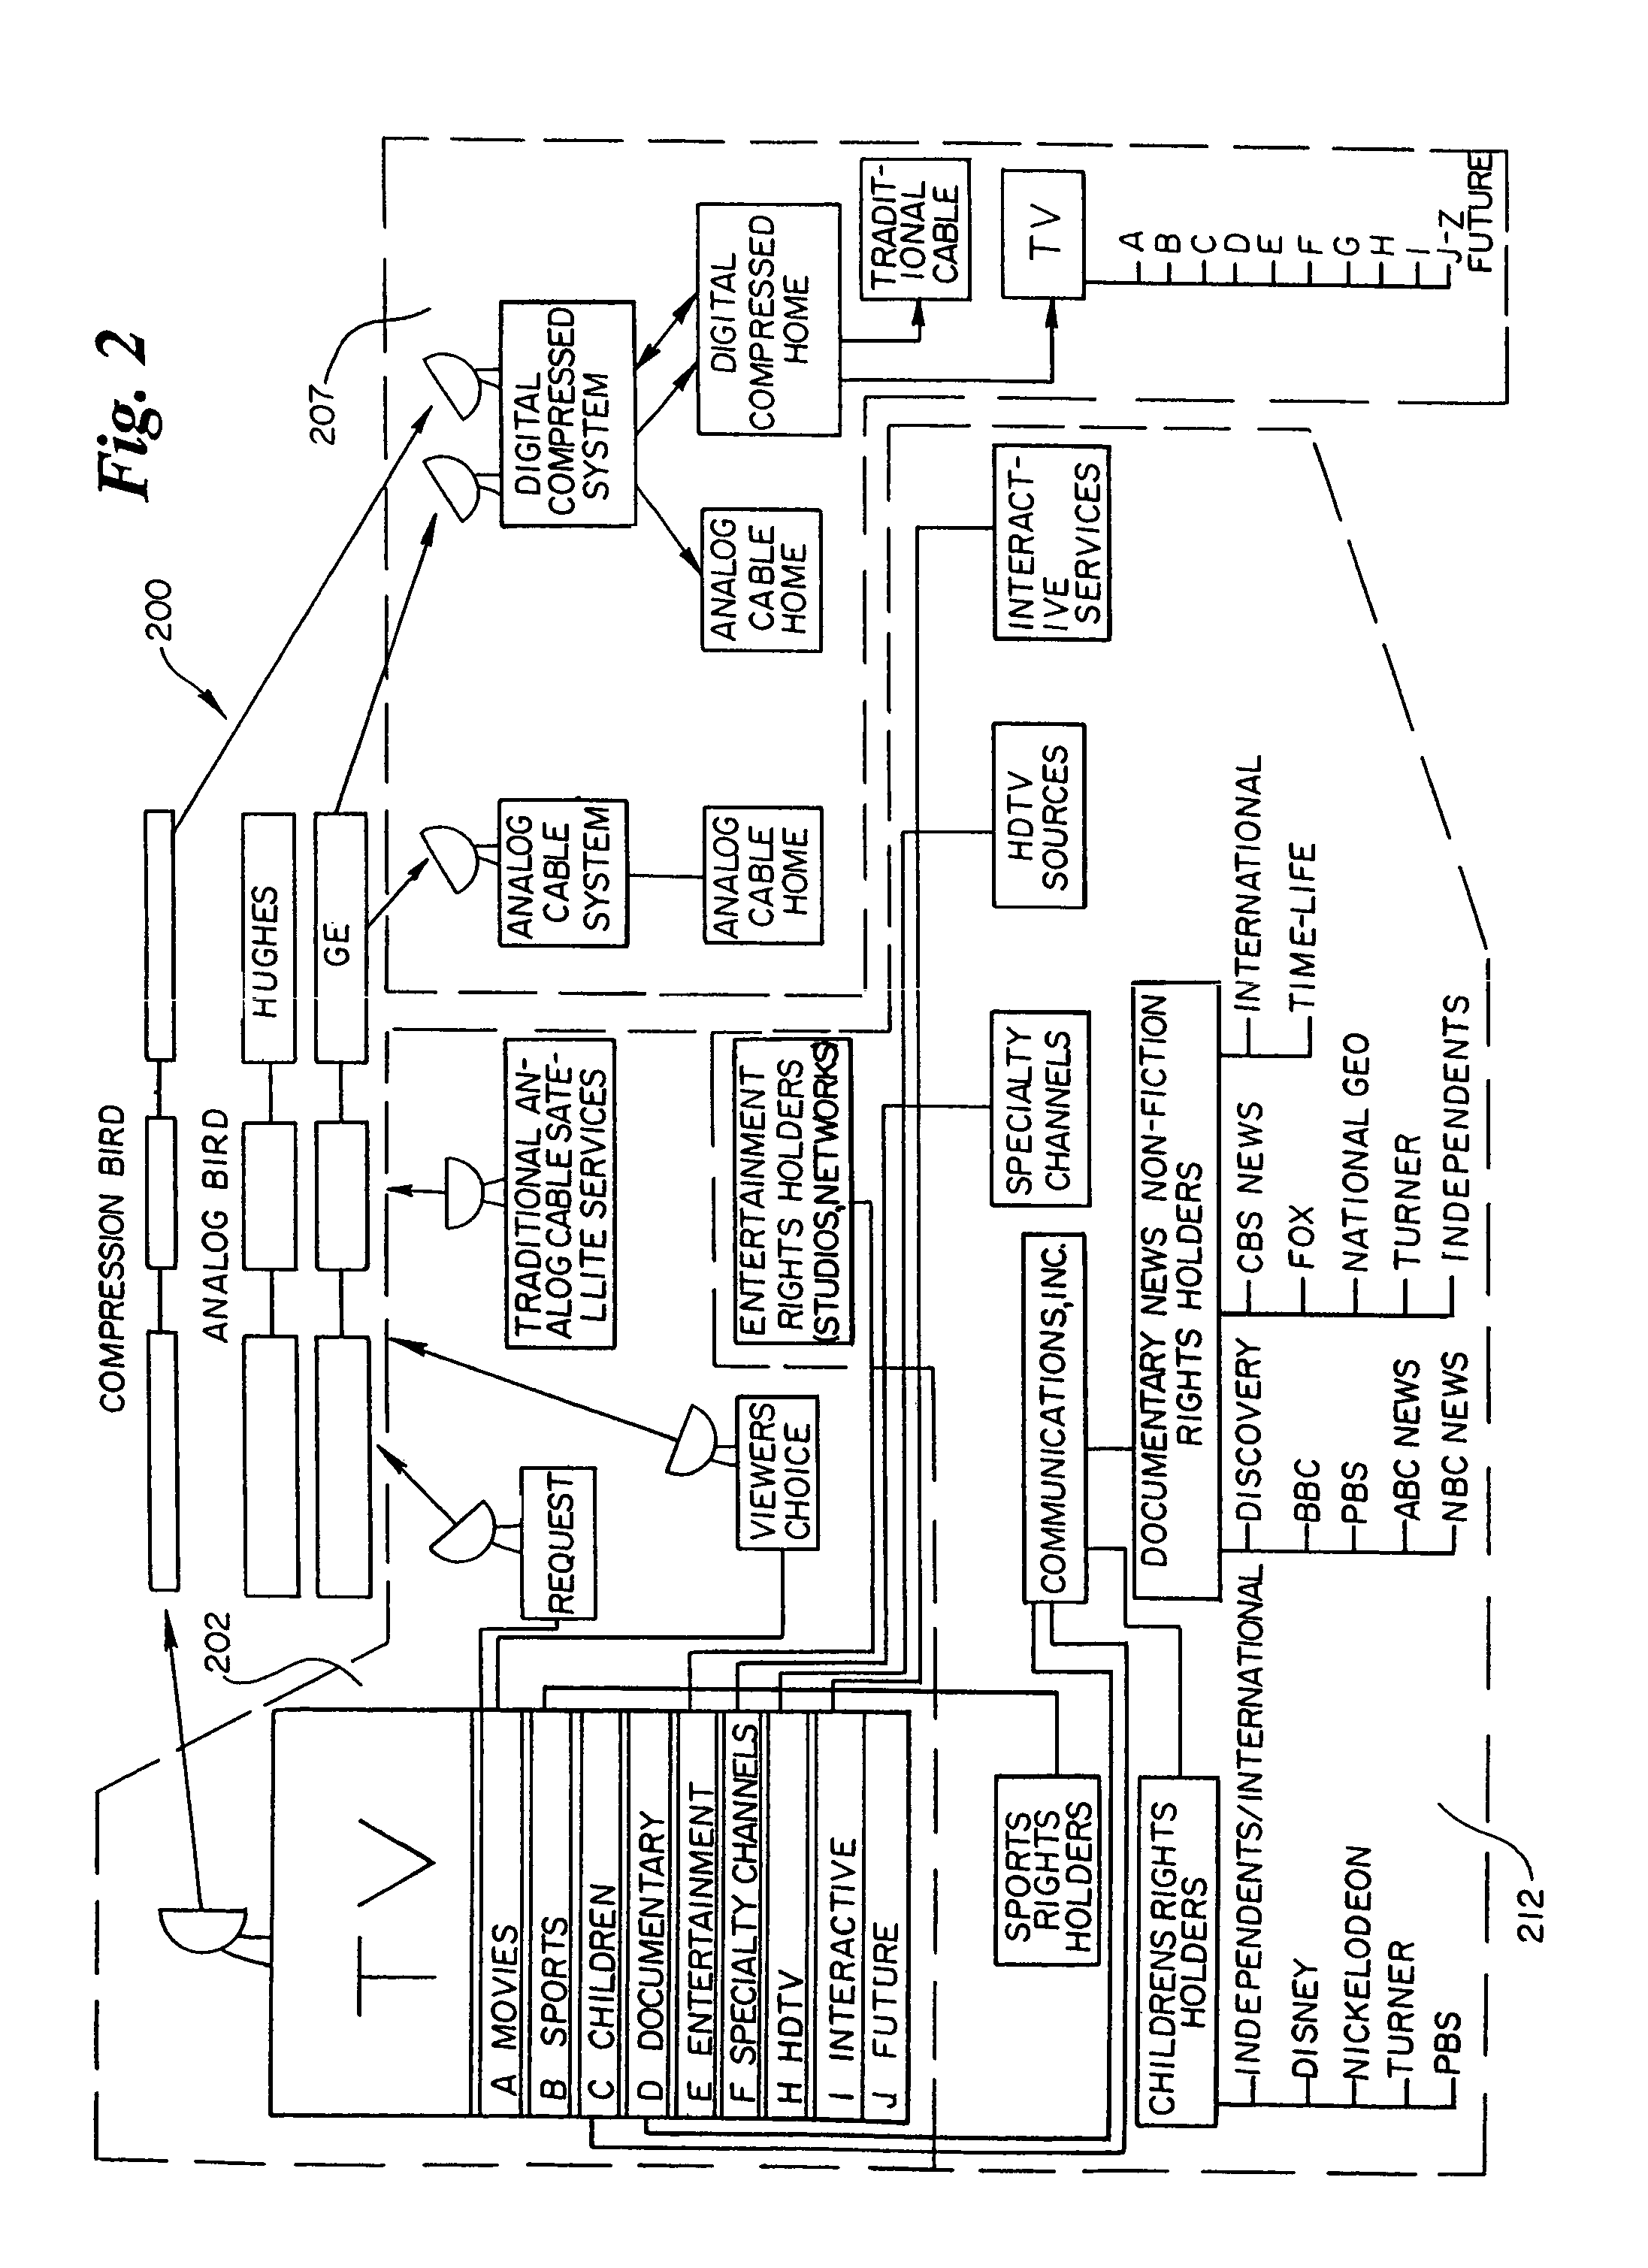 Method and apparatus for targeted advertising